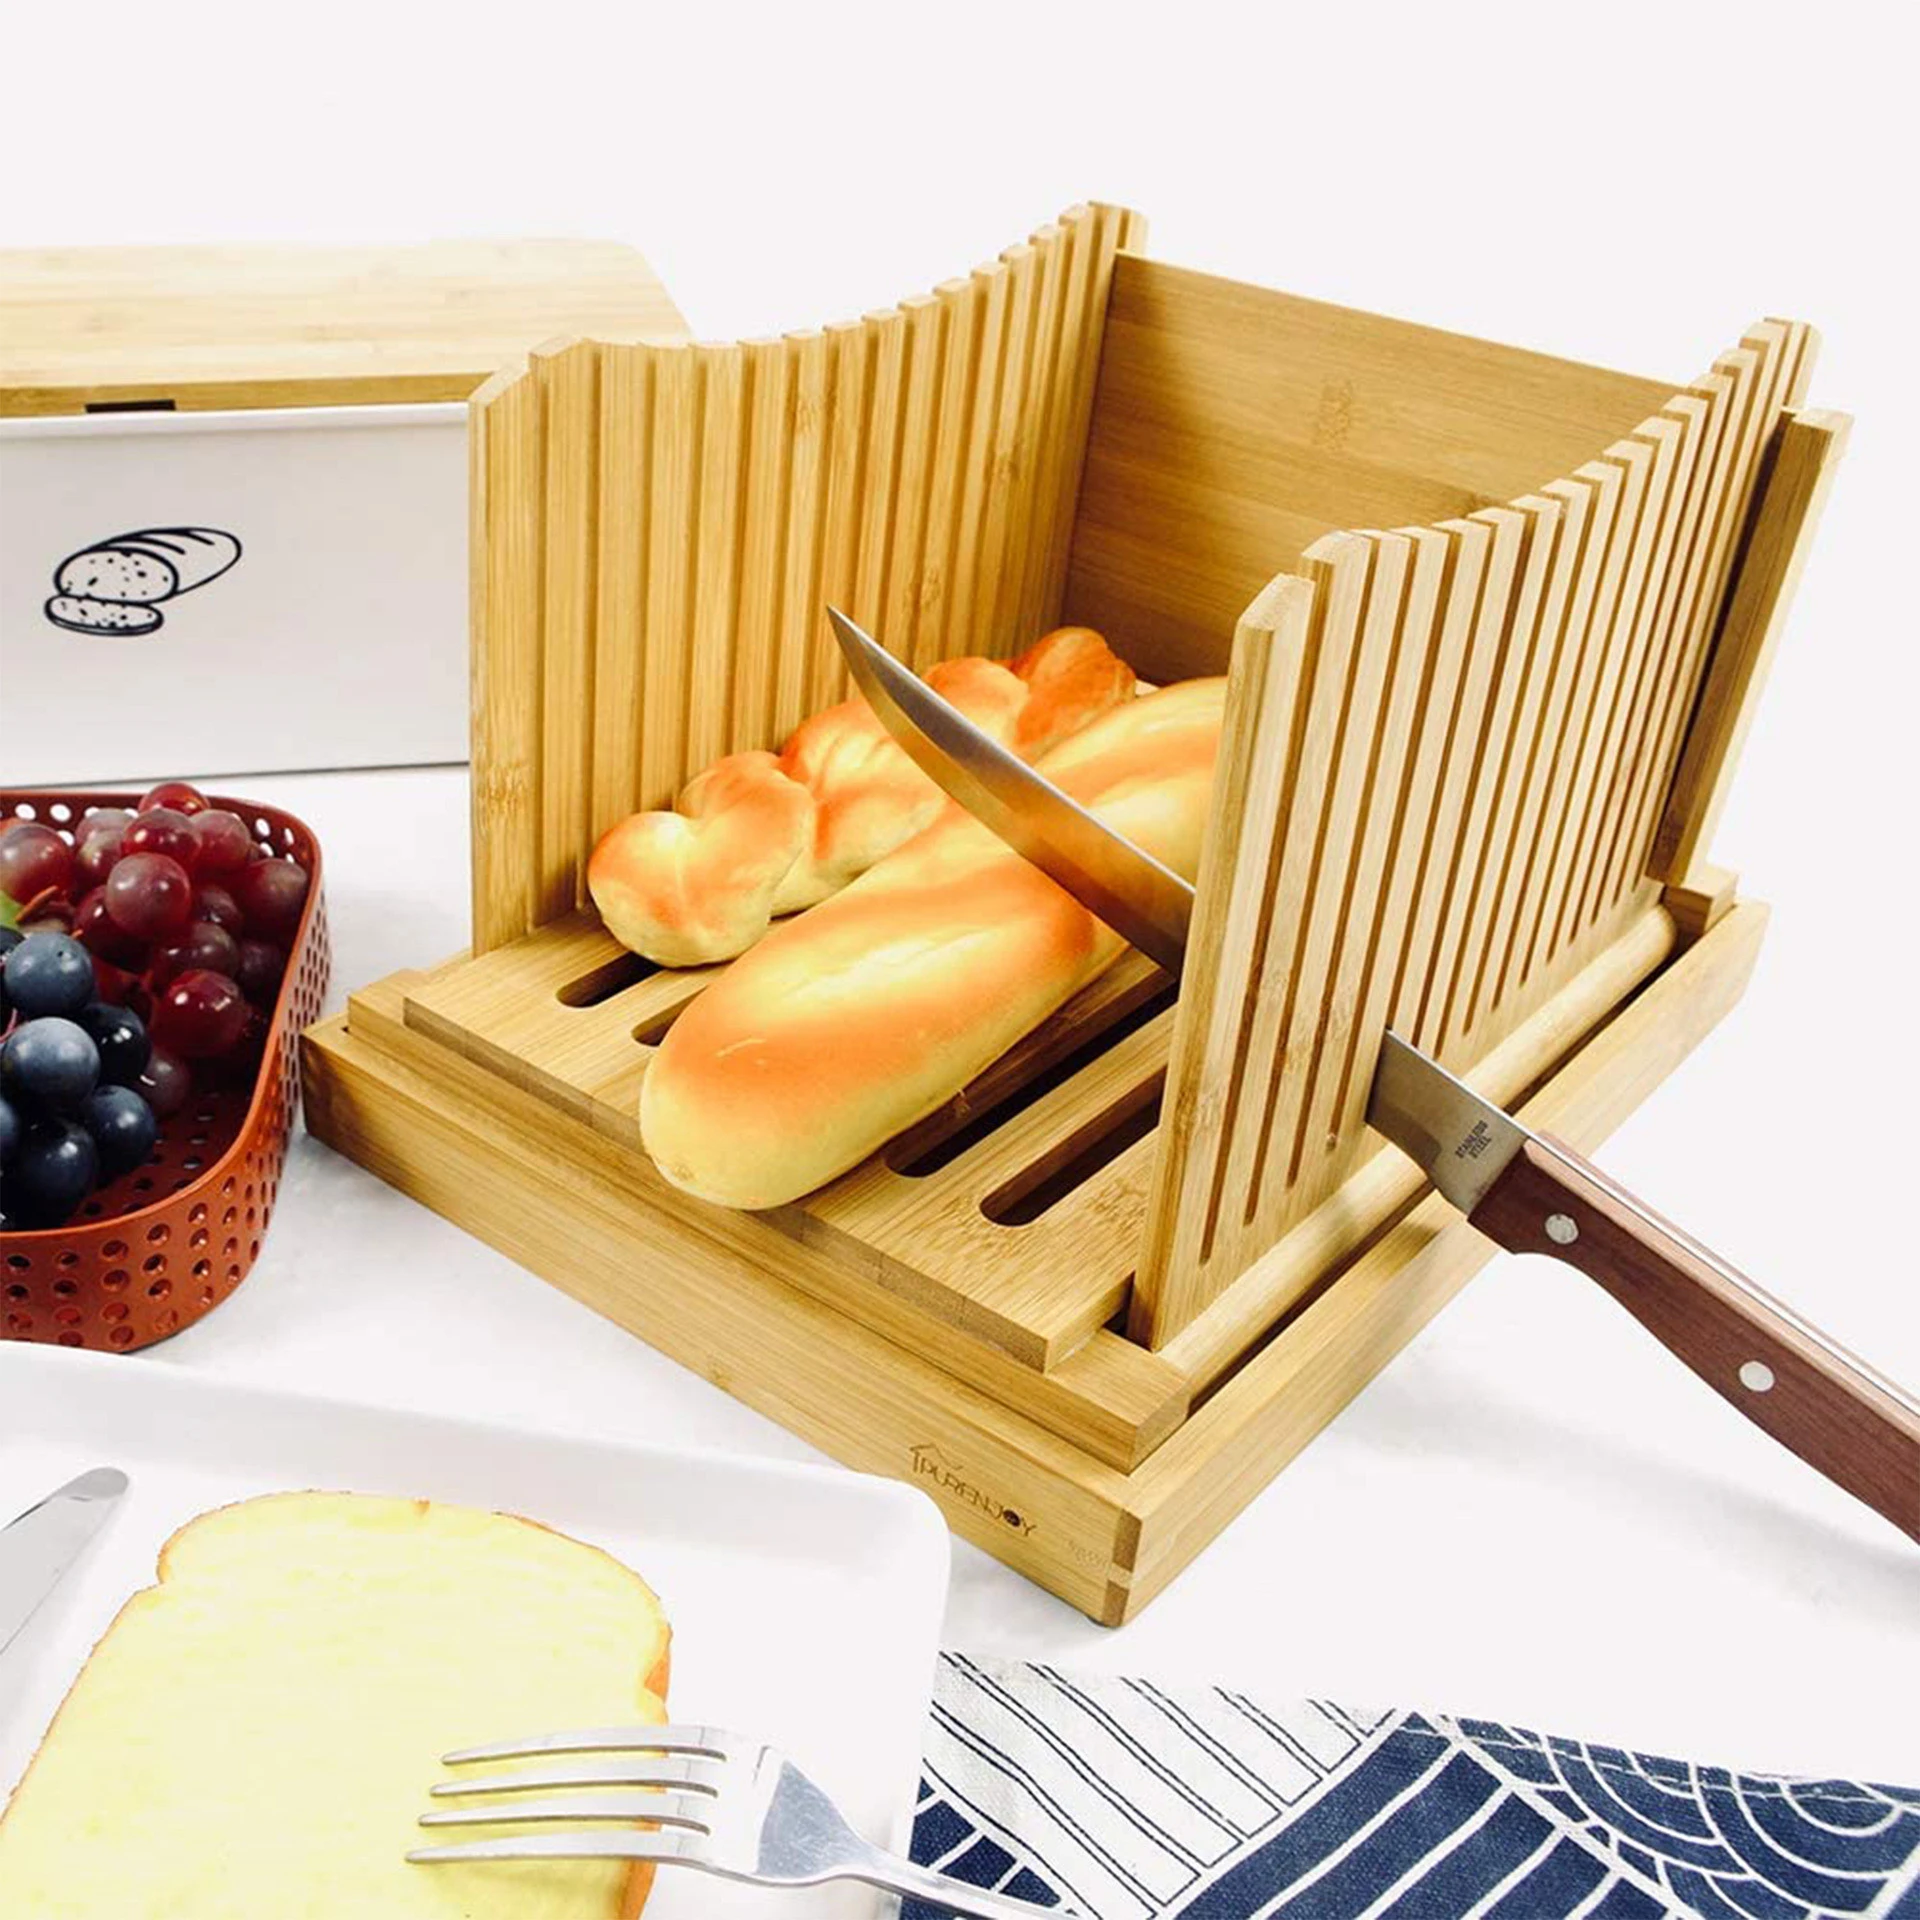 Organic Bamboo Bread Slicer Cutting Guide For Homemade Bread Loaf Cakes Bagels Foldable And Compact With Crumbs Tray